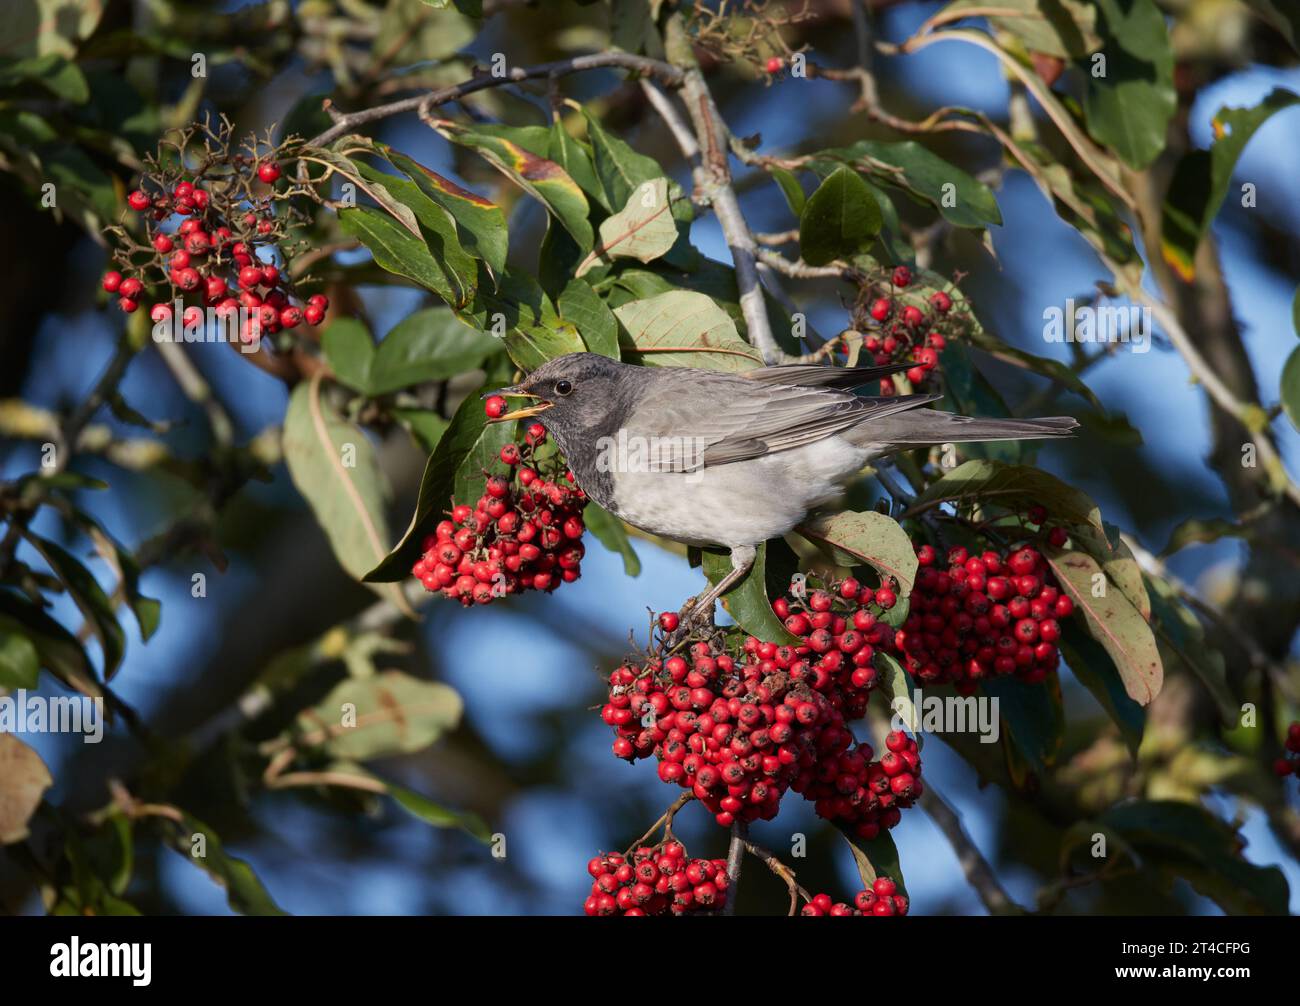 Black-throated Thrush (Turdus atrogularis), male perches eating on a branch with ripe red berries, side view, United Kingdom, England Stock Photo